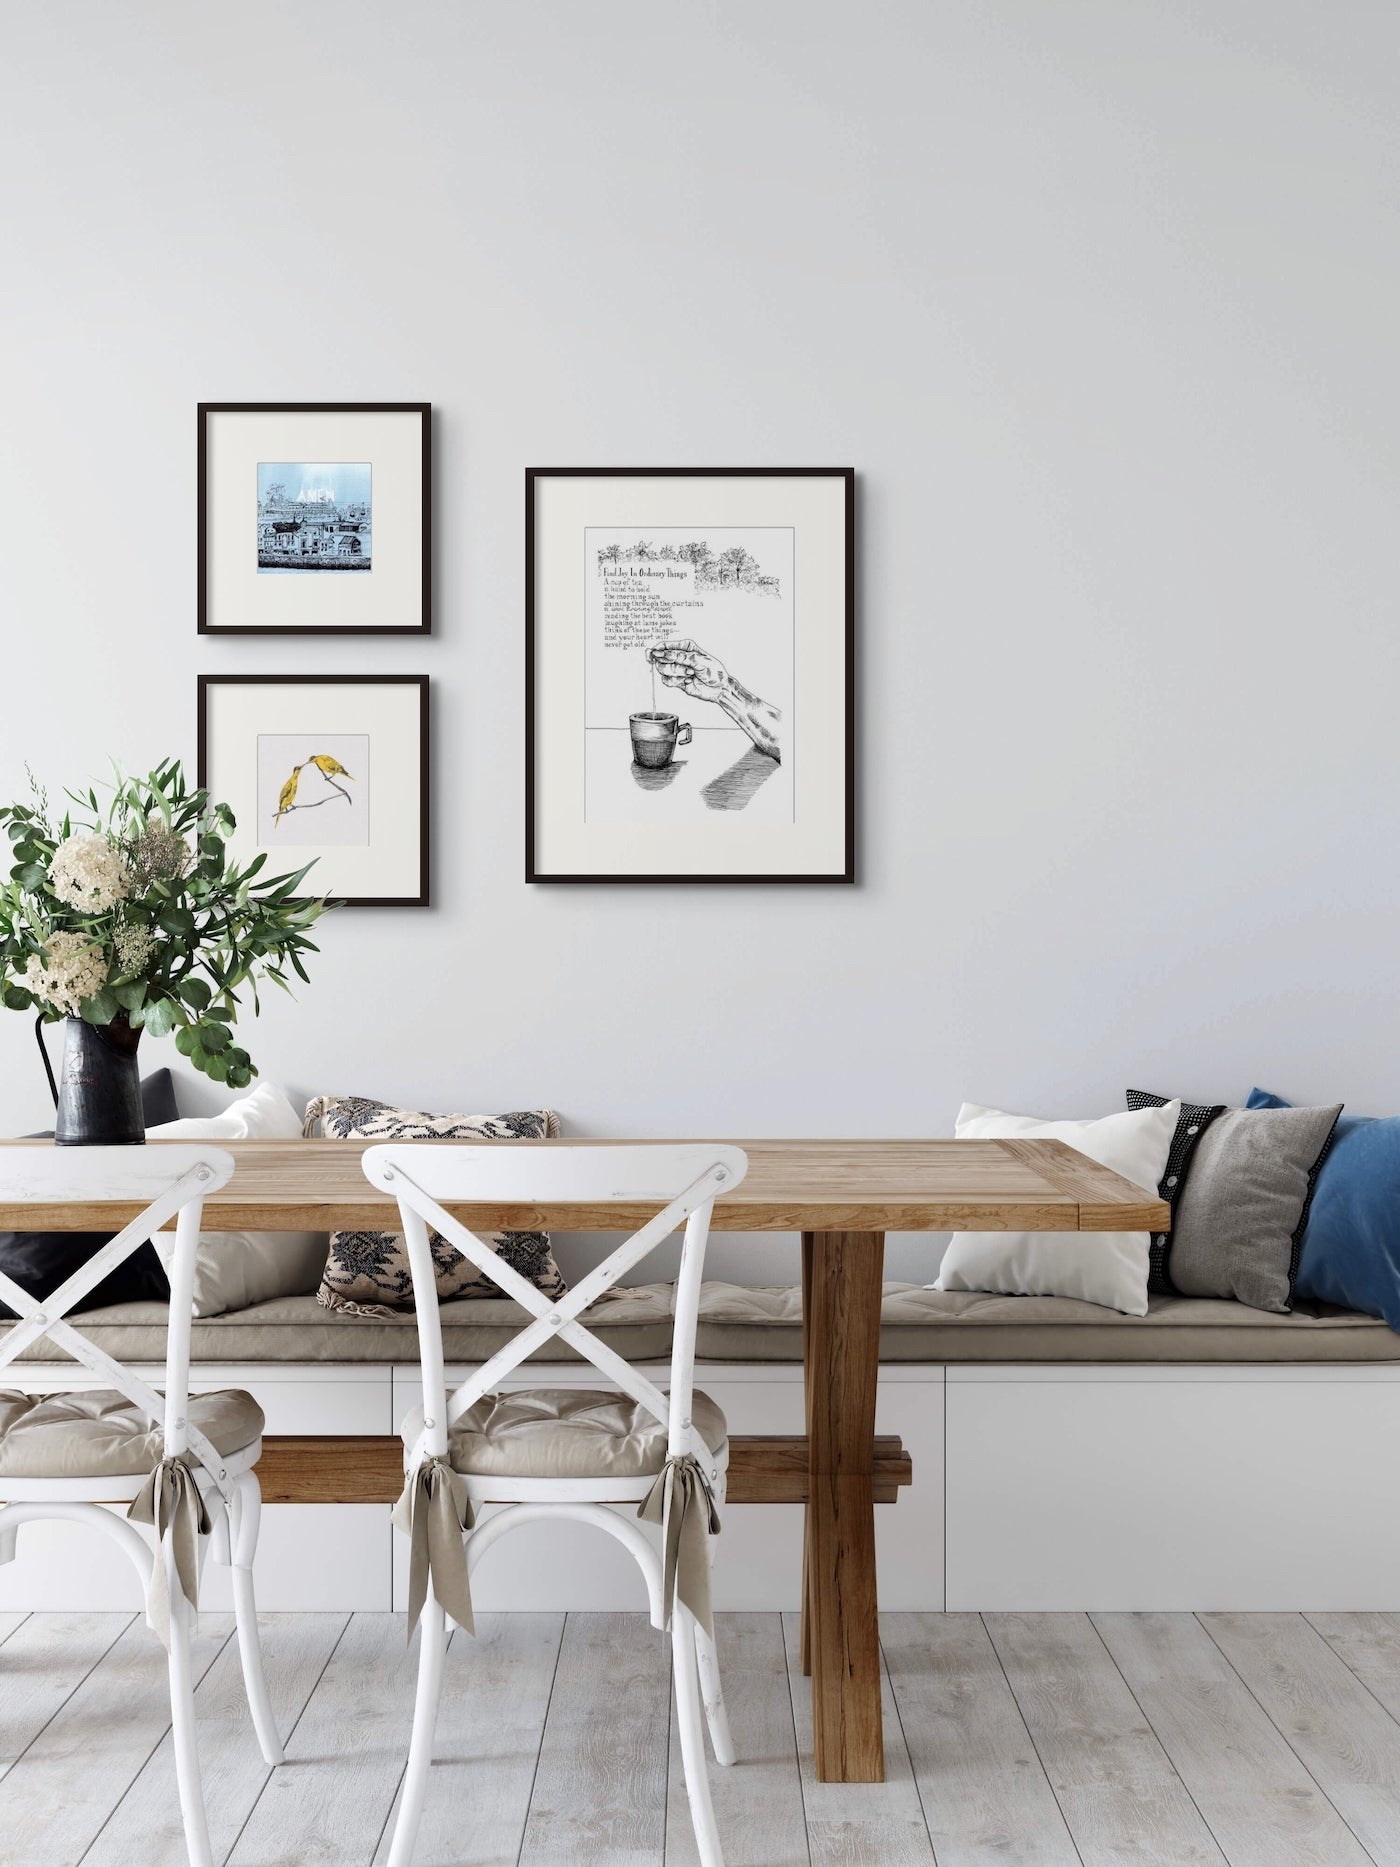 Image: set a three framed line drawing art prints in a living room